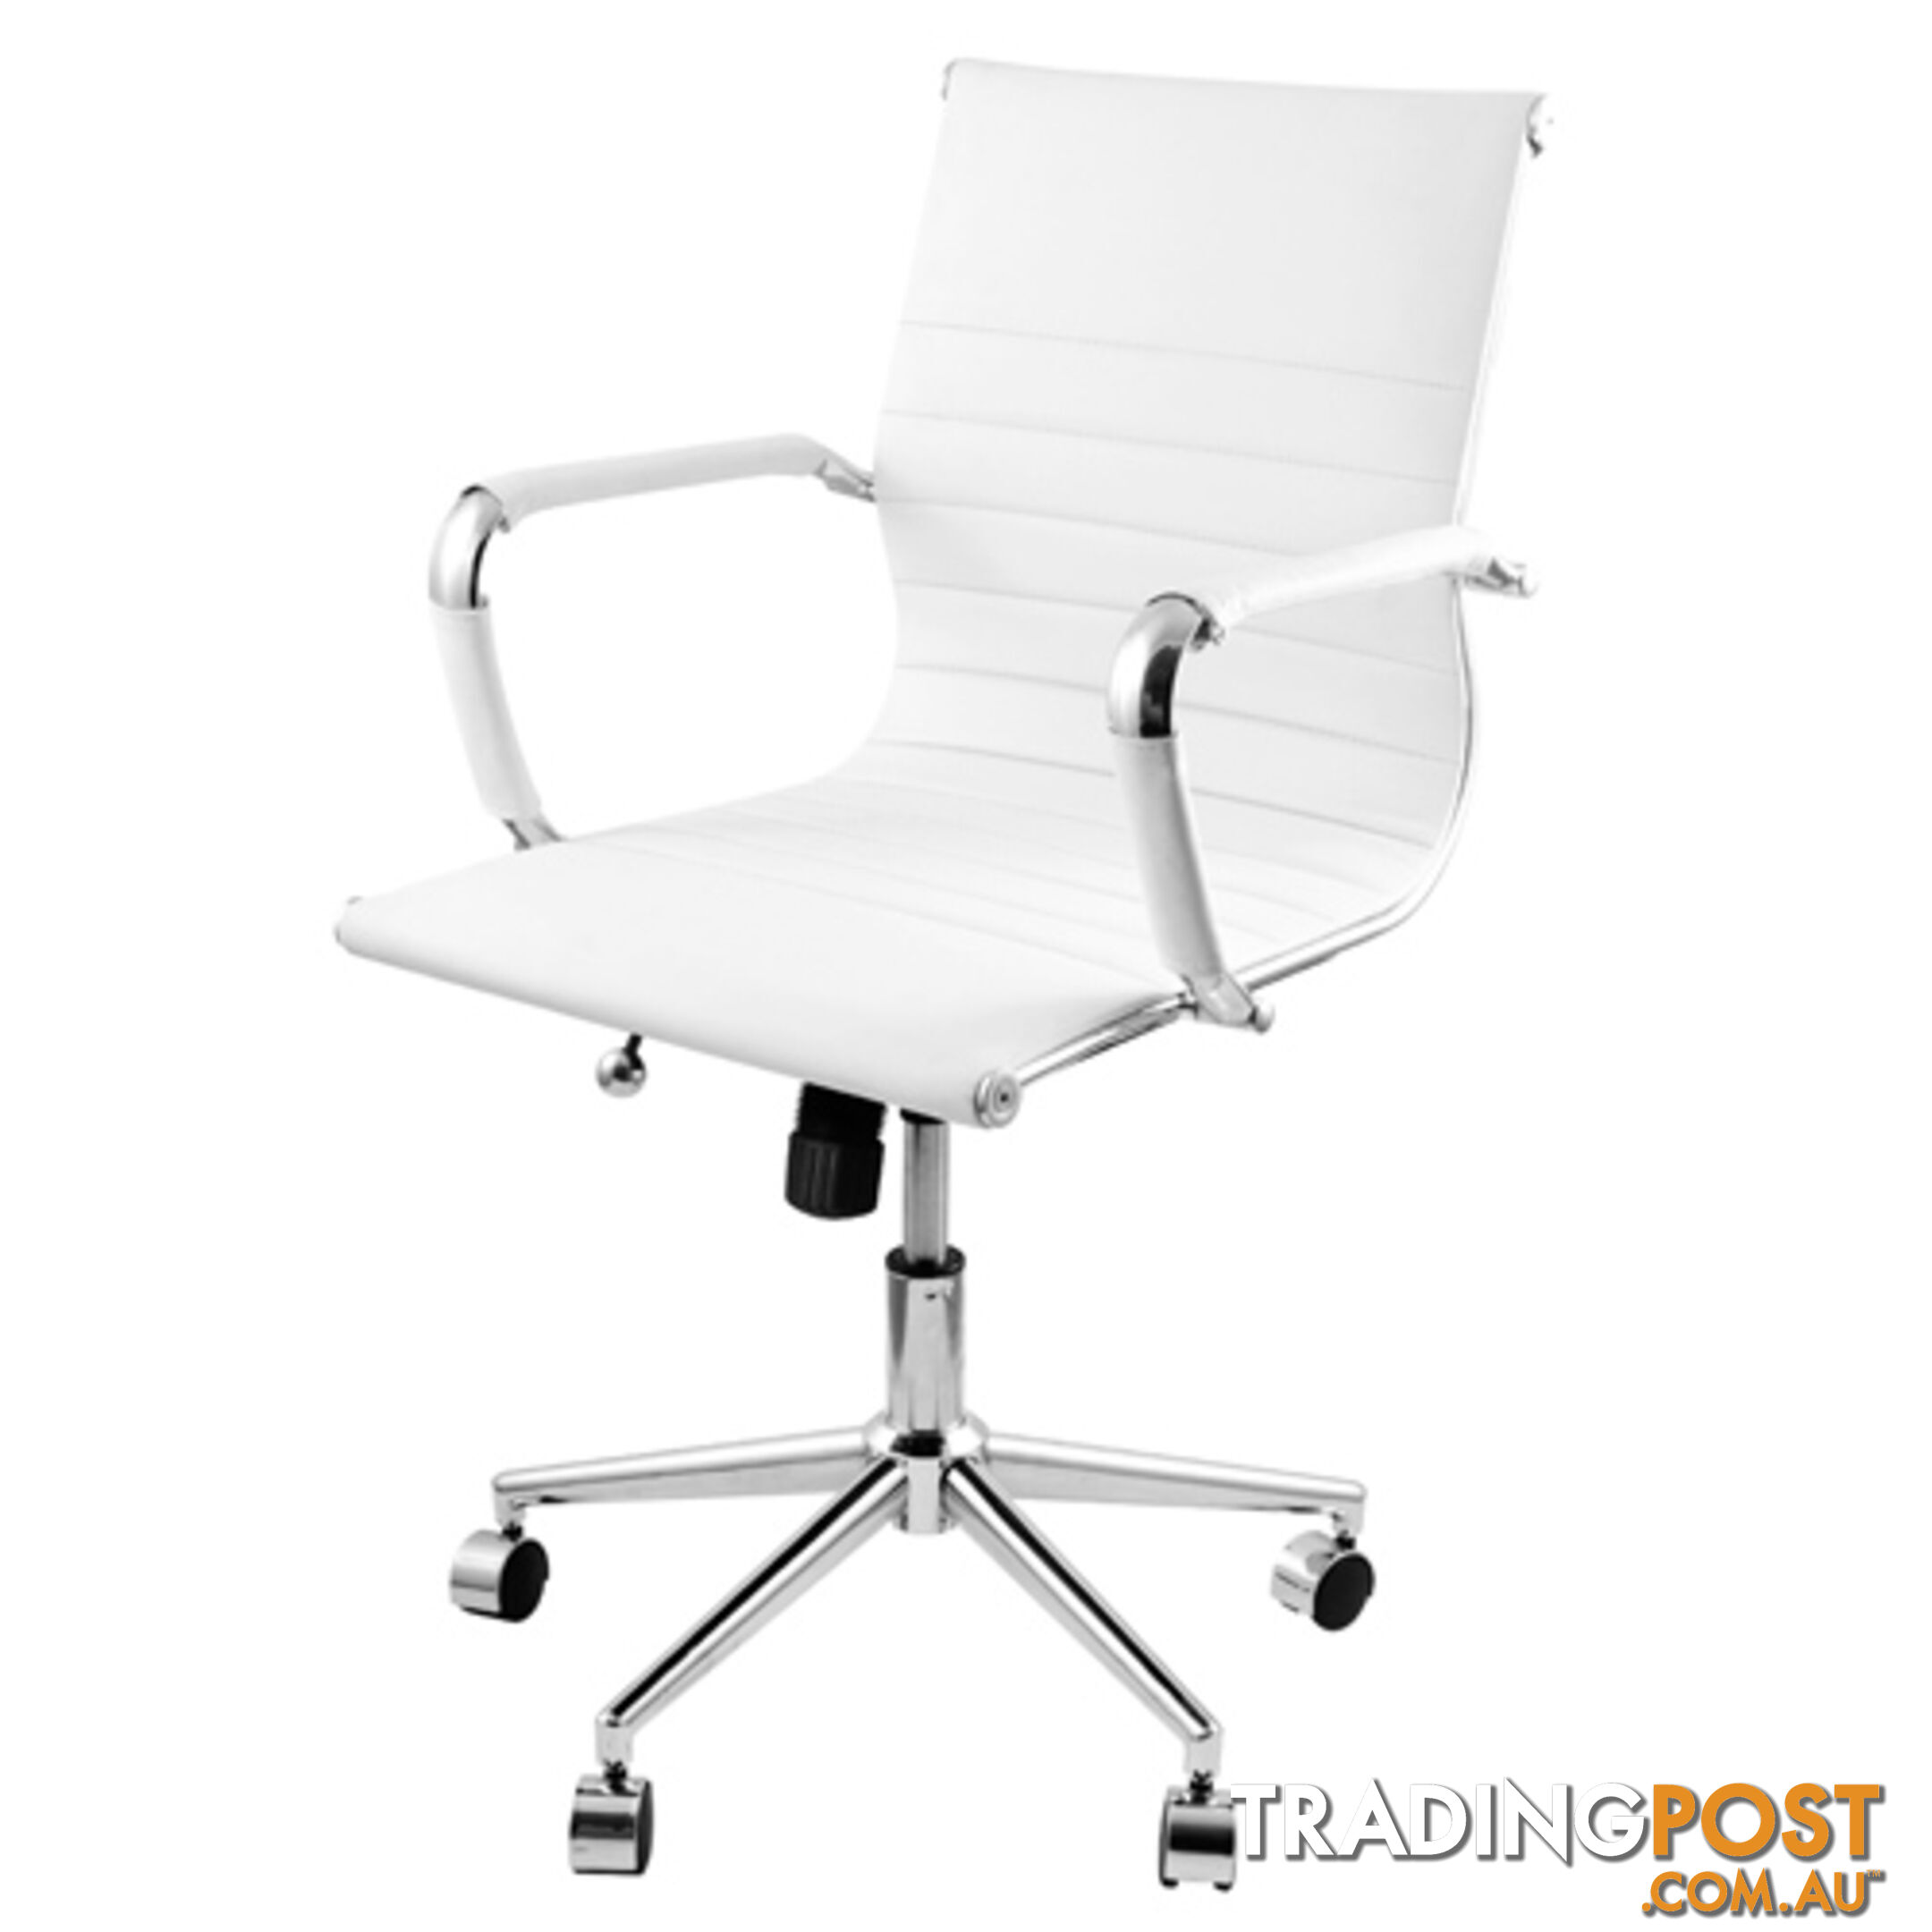 Eames Replica PU Leather Executive Designer Office Chair White